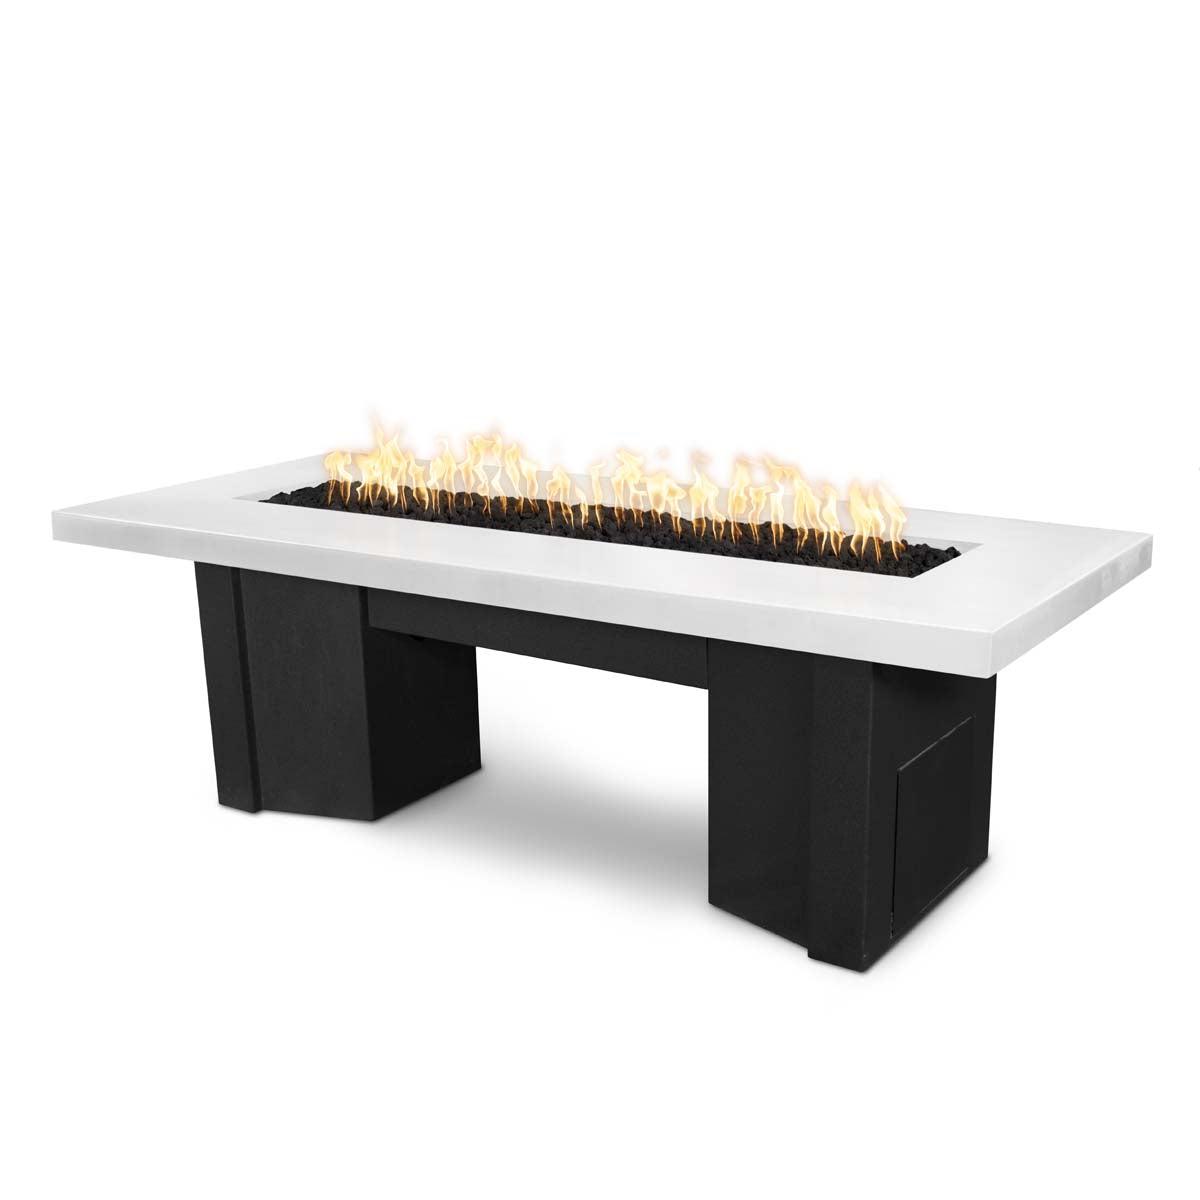 The Outdoor Plus Rectangular Alameda 48" Black & White Powder Coated Natural Gas Fire Pit with 110V Electronic Ignition